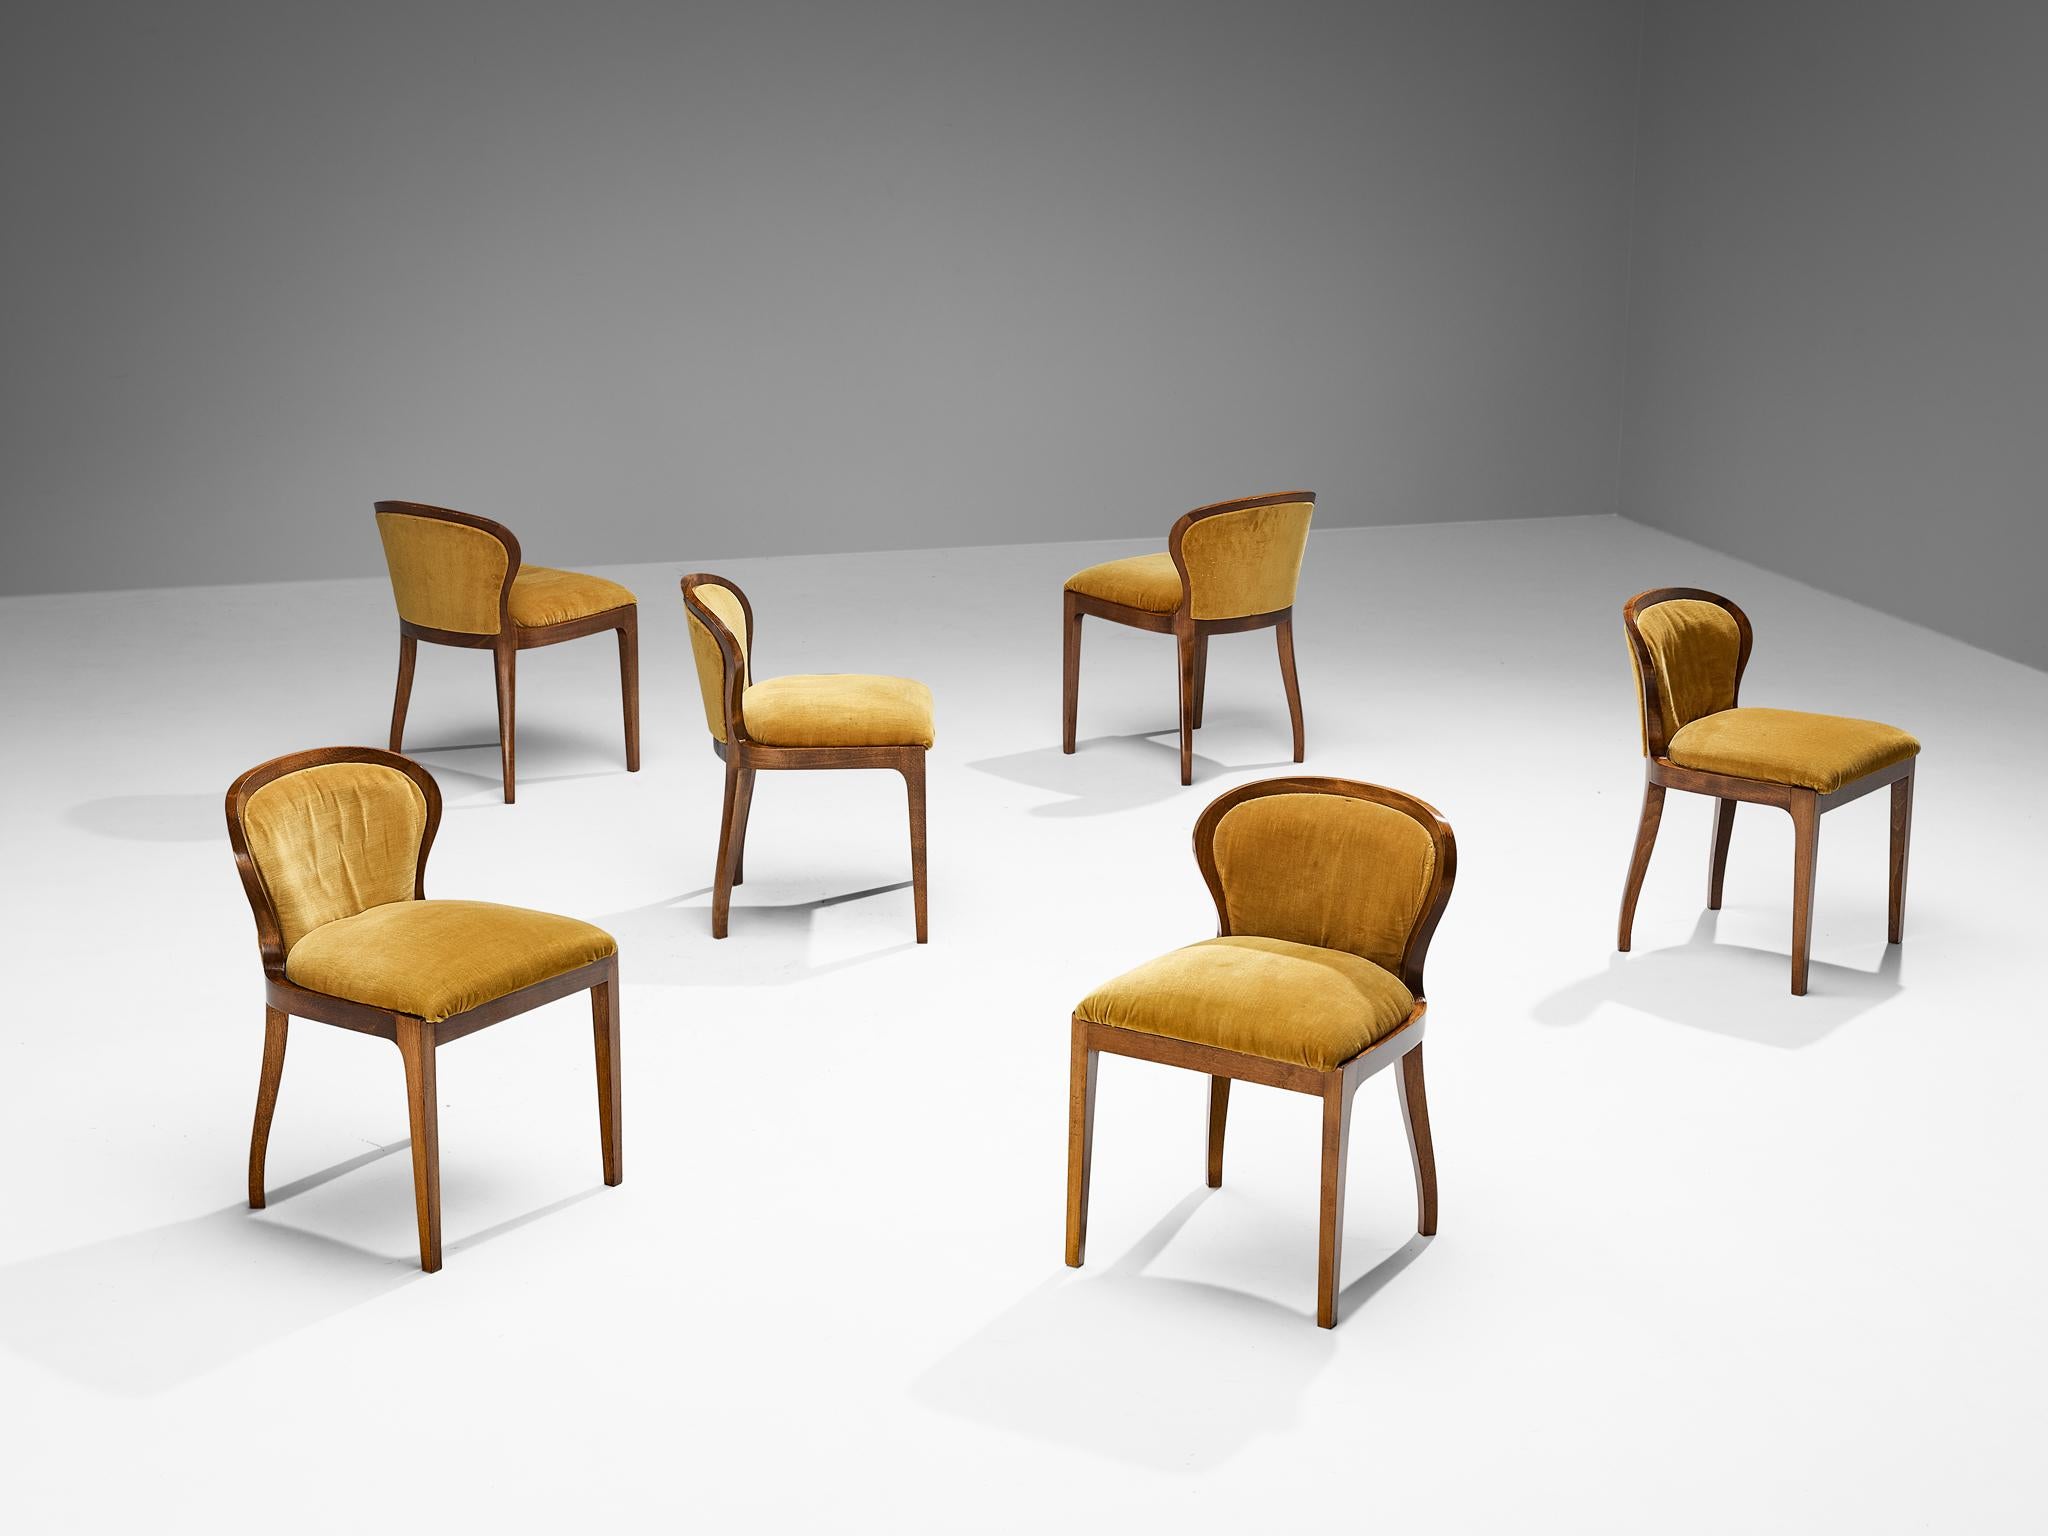 Lorenzo Forges Davanzati for Elam, set of six 'Stradivarius' dining chairs, velvet, beech, Italy, 1960s

These chairs are designed by Lorenzo Forges Davanzati for Elam and are a quite rare find. The chairs are characterized by a backrest that